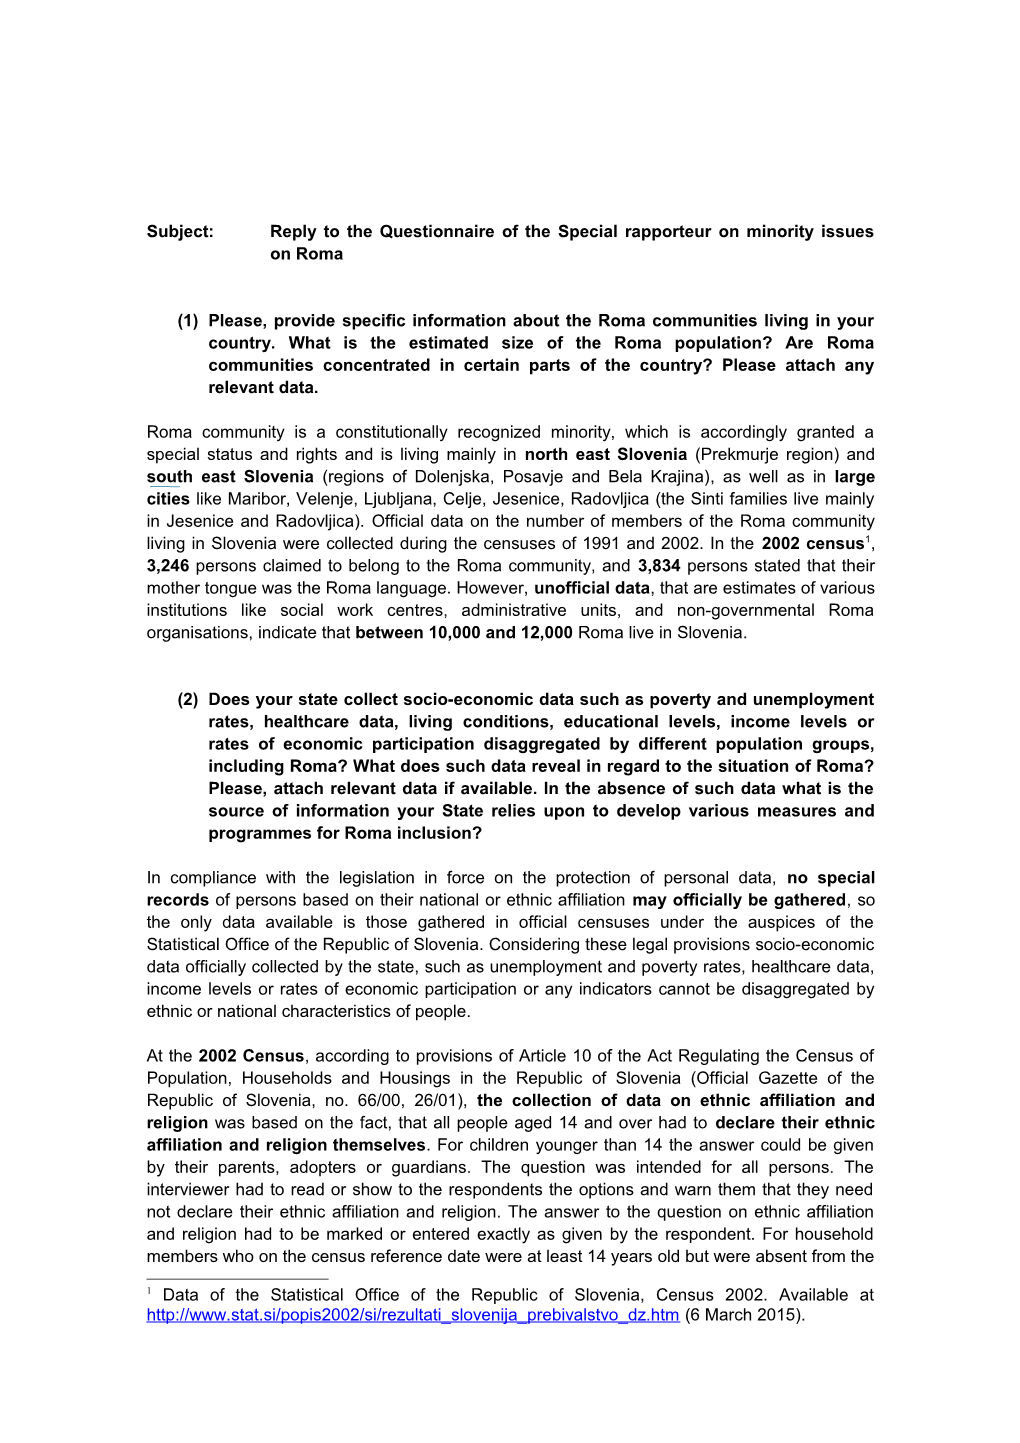 Subject: Reply to the Questionnaire of the Special Rapporteur on Minority Issues on Roma